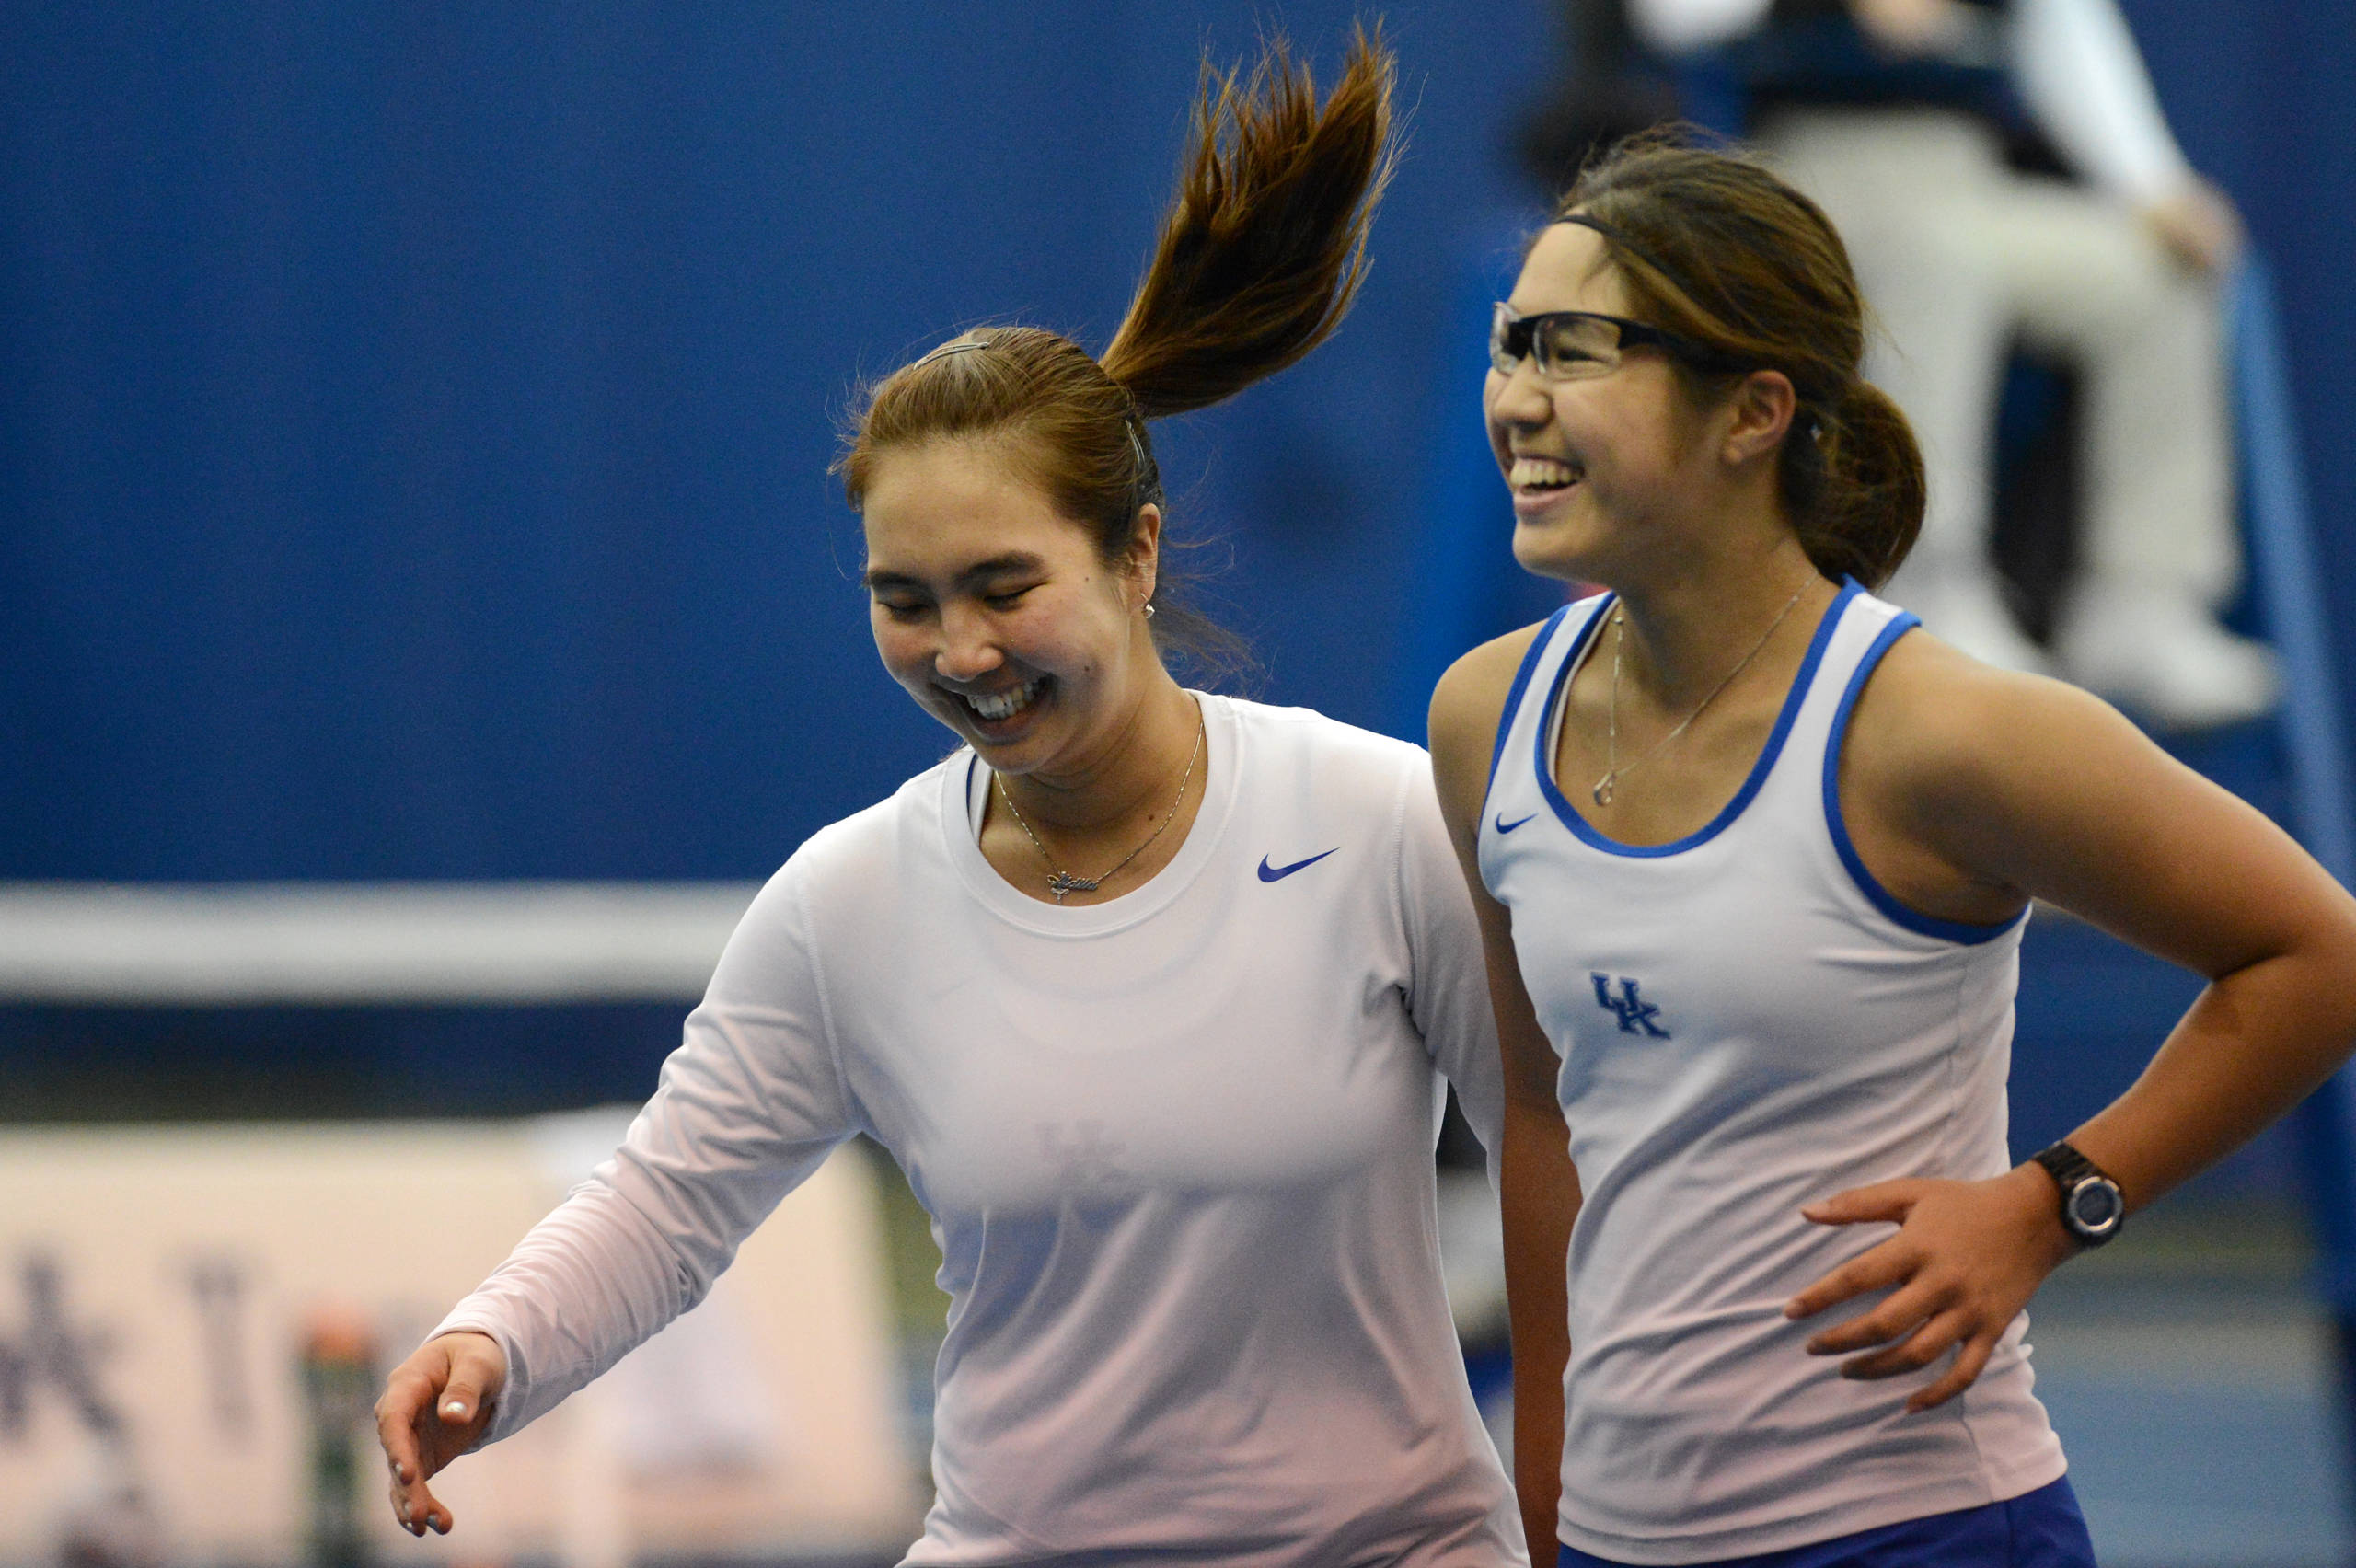 Adachi and Sutjiadi Advance to Doubles Final of ITA Regionals